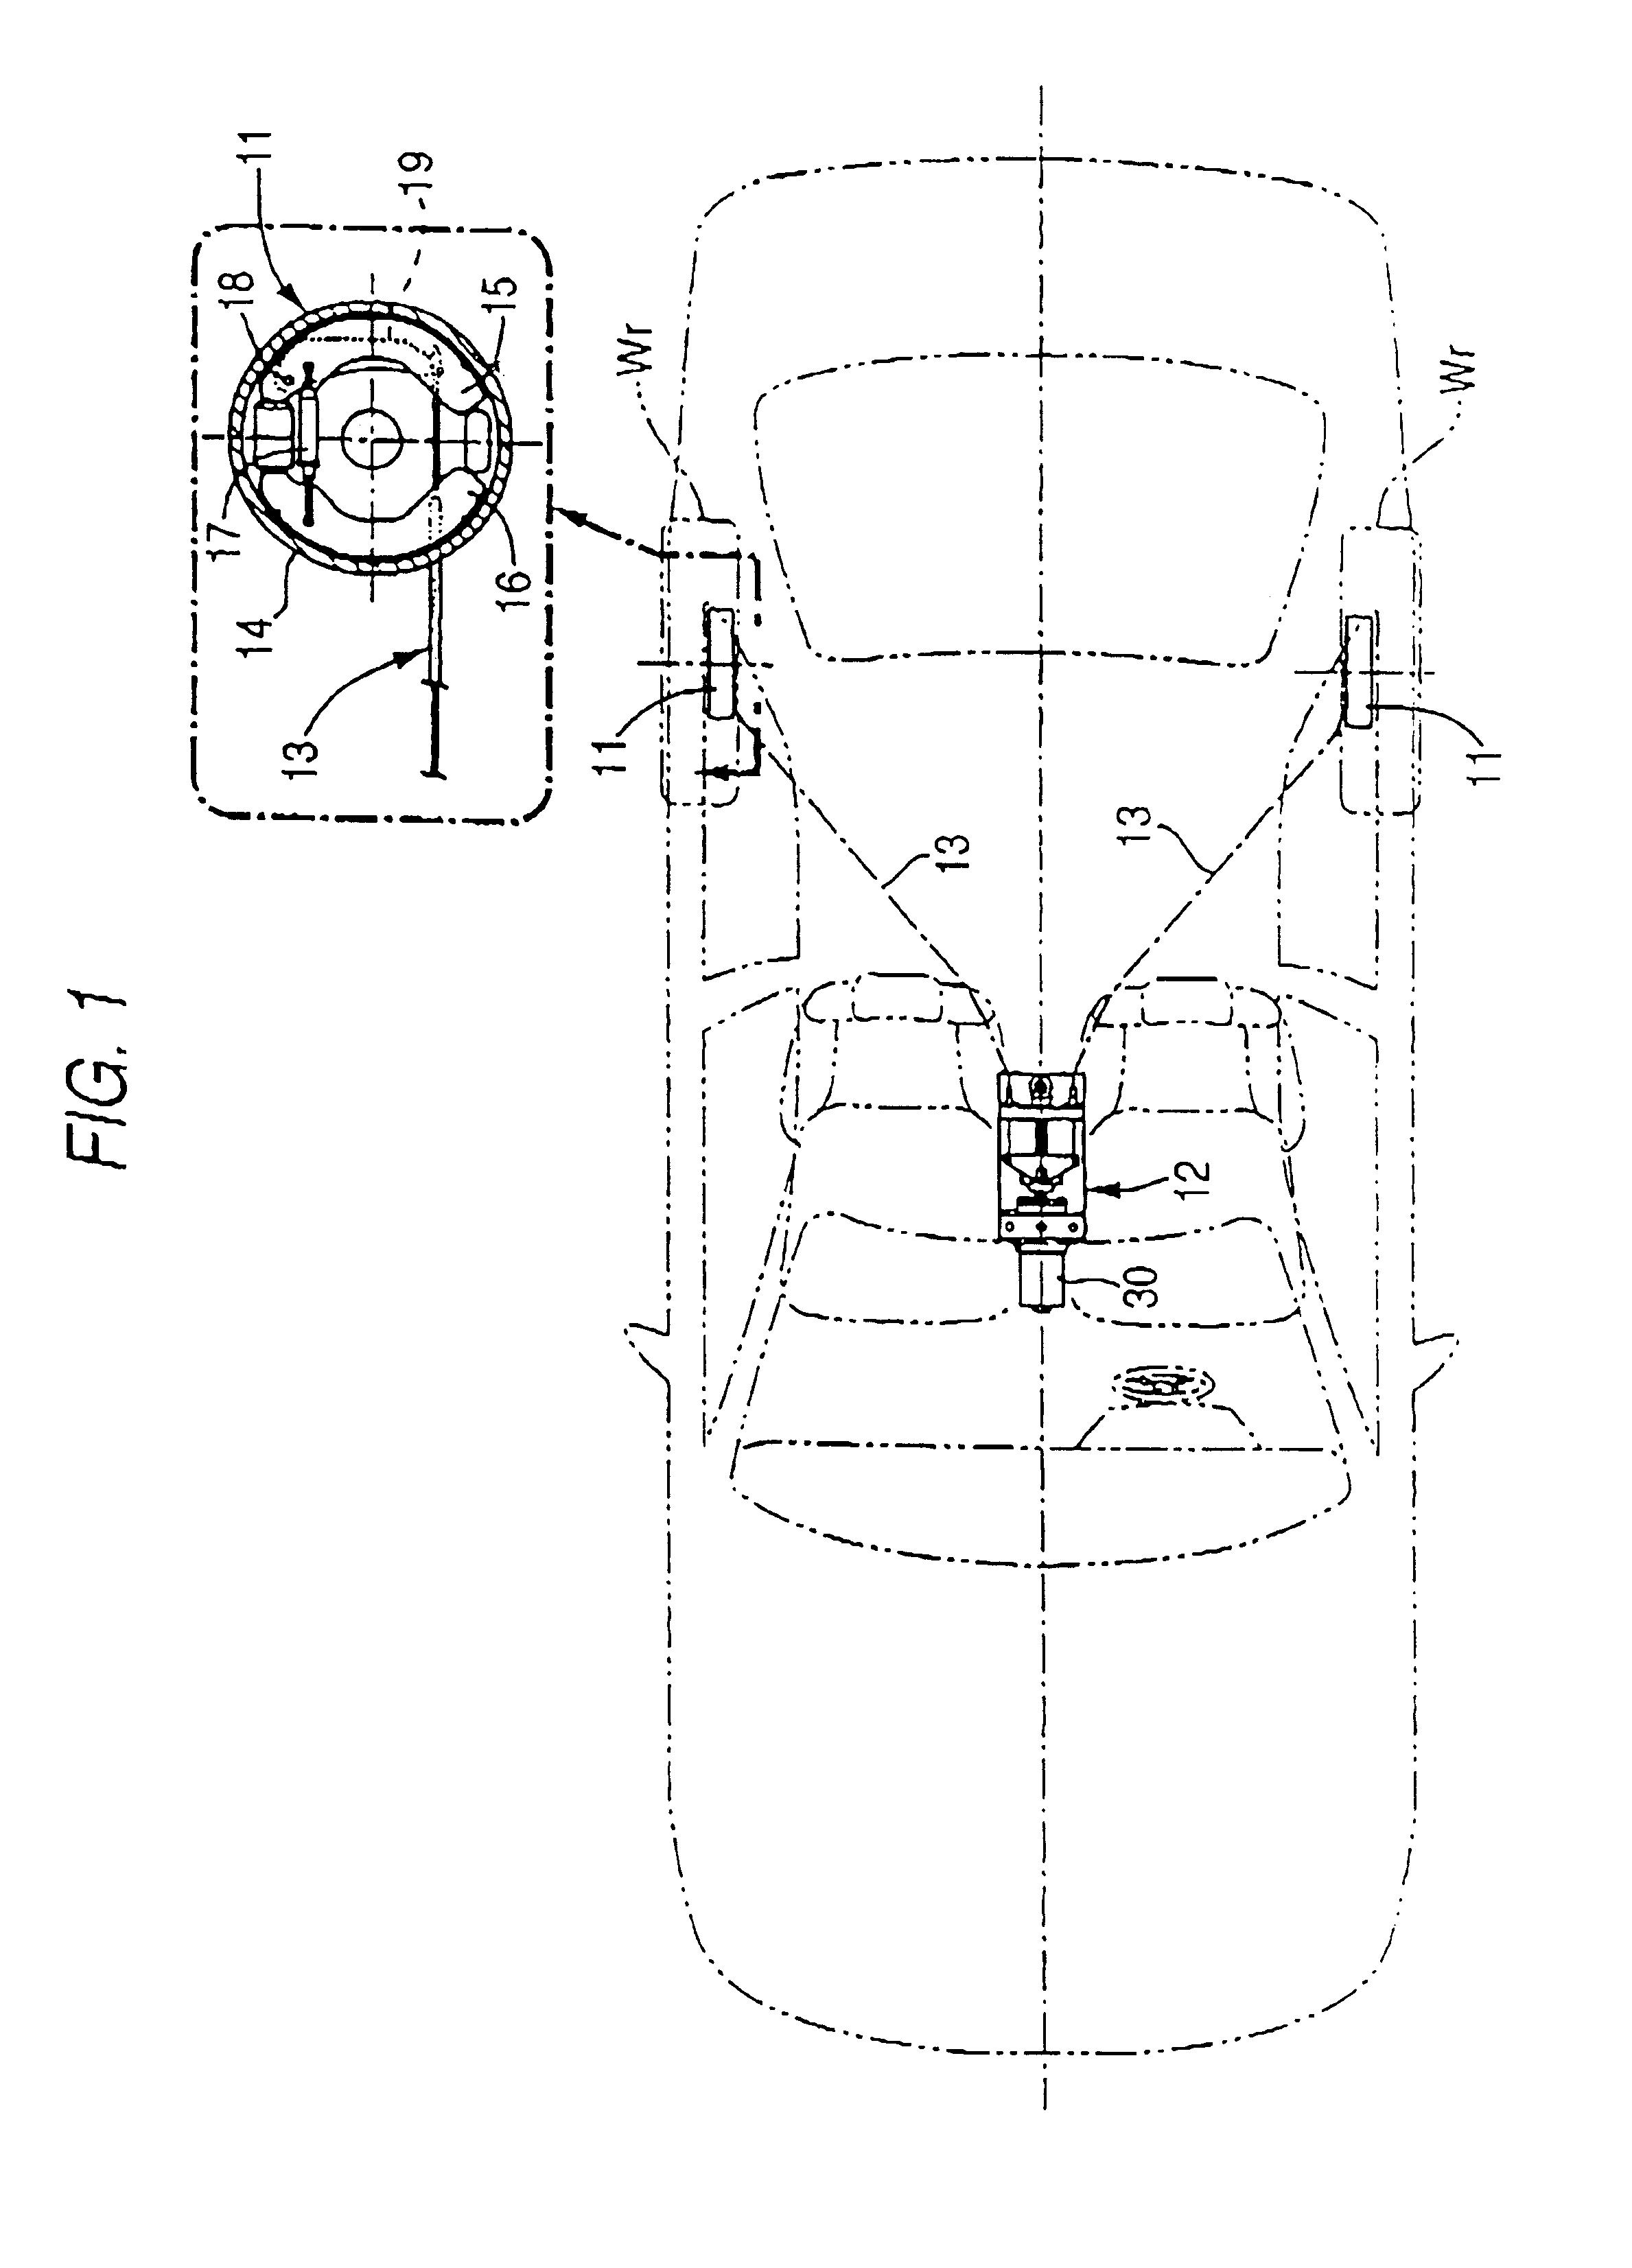 Electrically operated parking brake apparatus